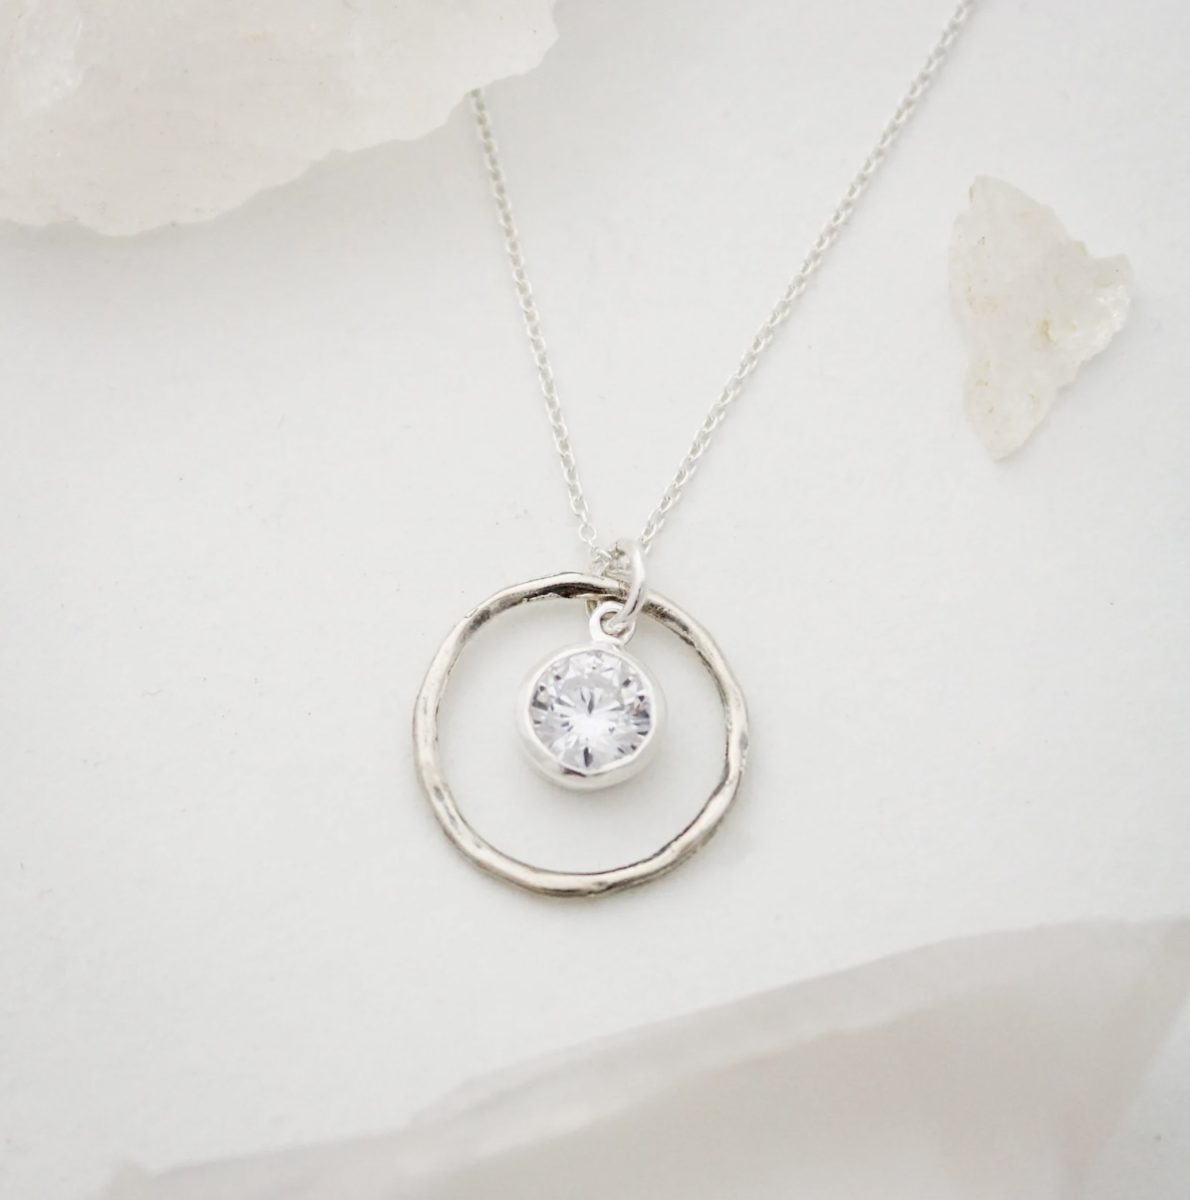 10 amazing aries birthstone gifts | find the perfect gift featuring aries birthstones.